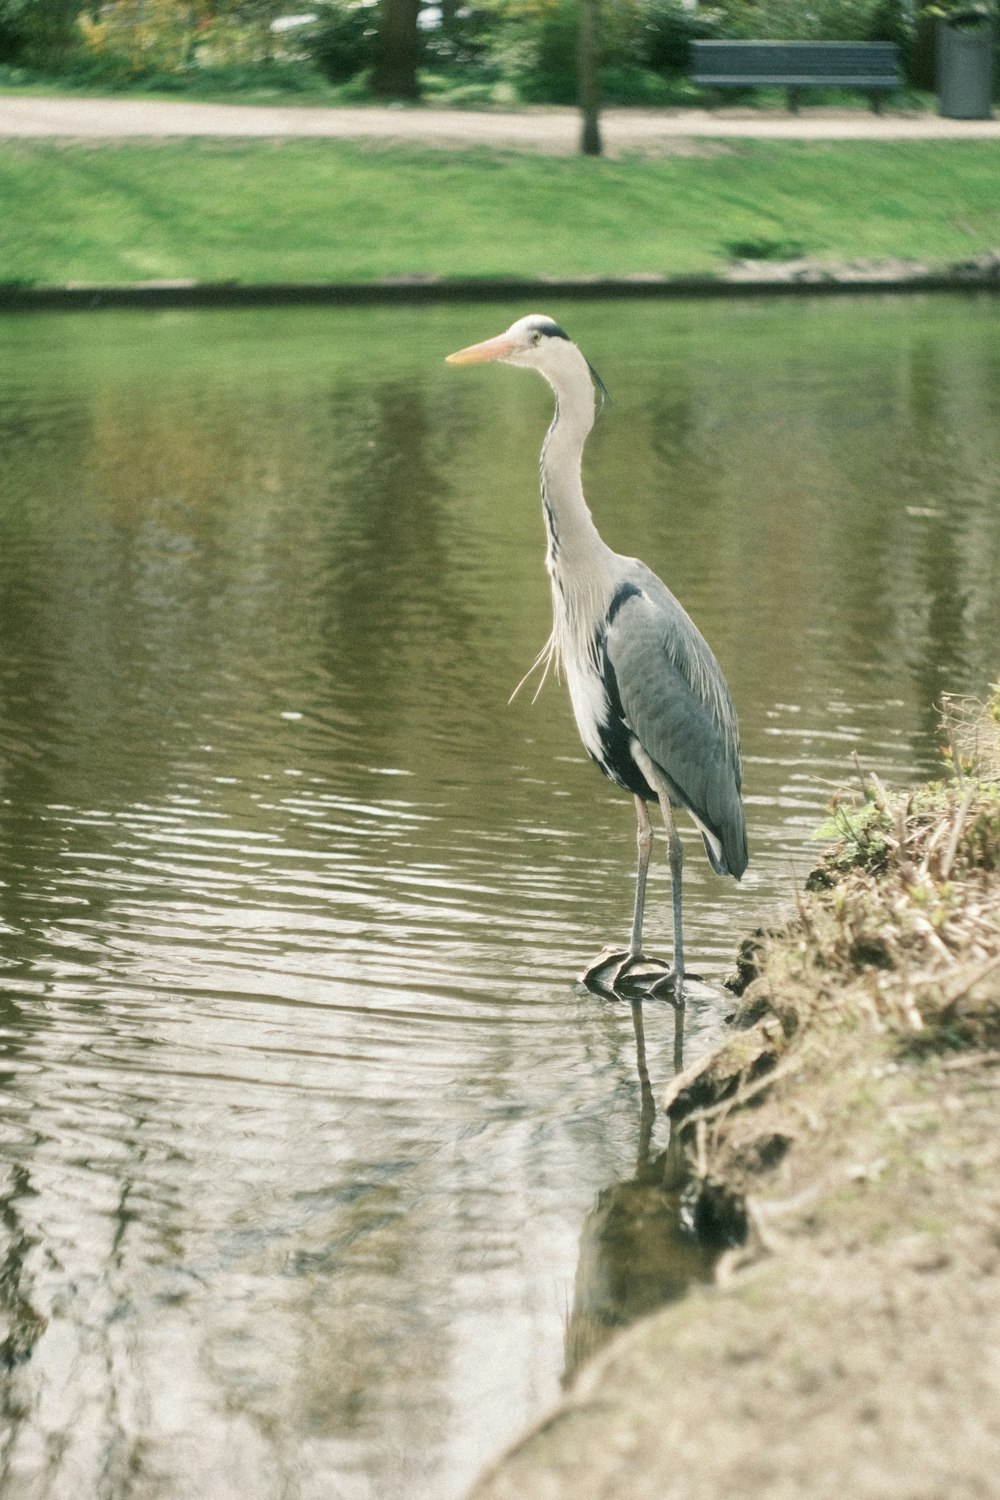 a bird is standing on the edge of a body of water